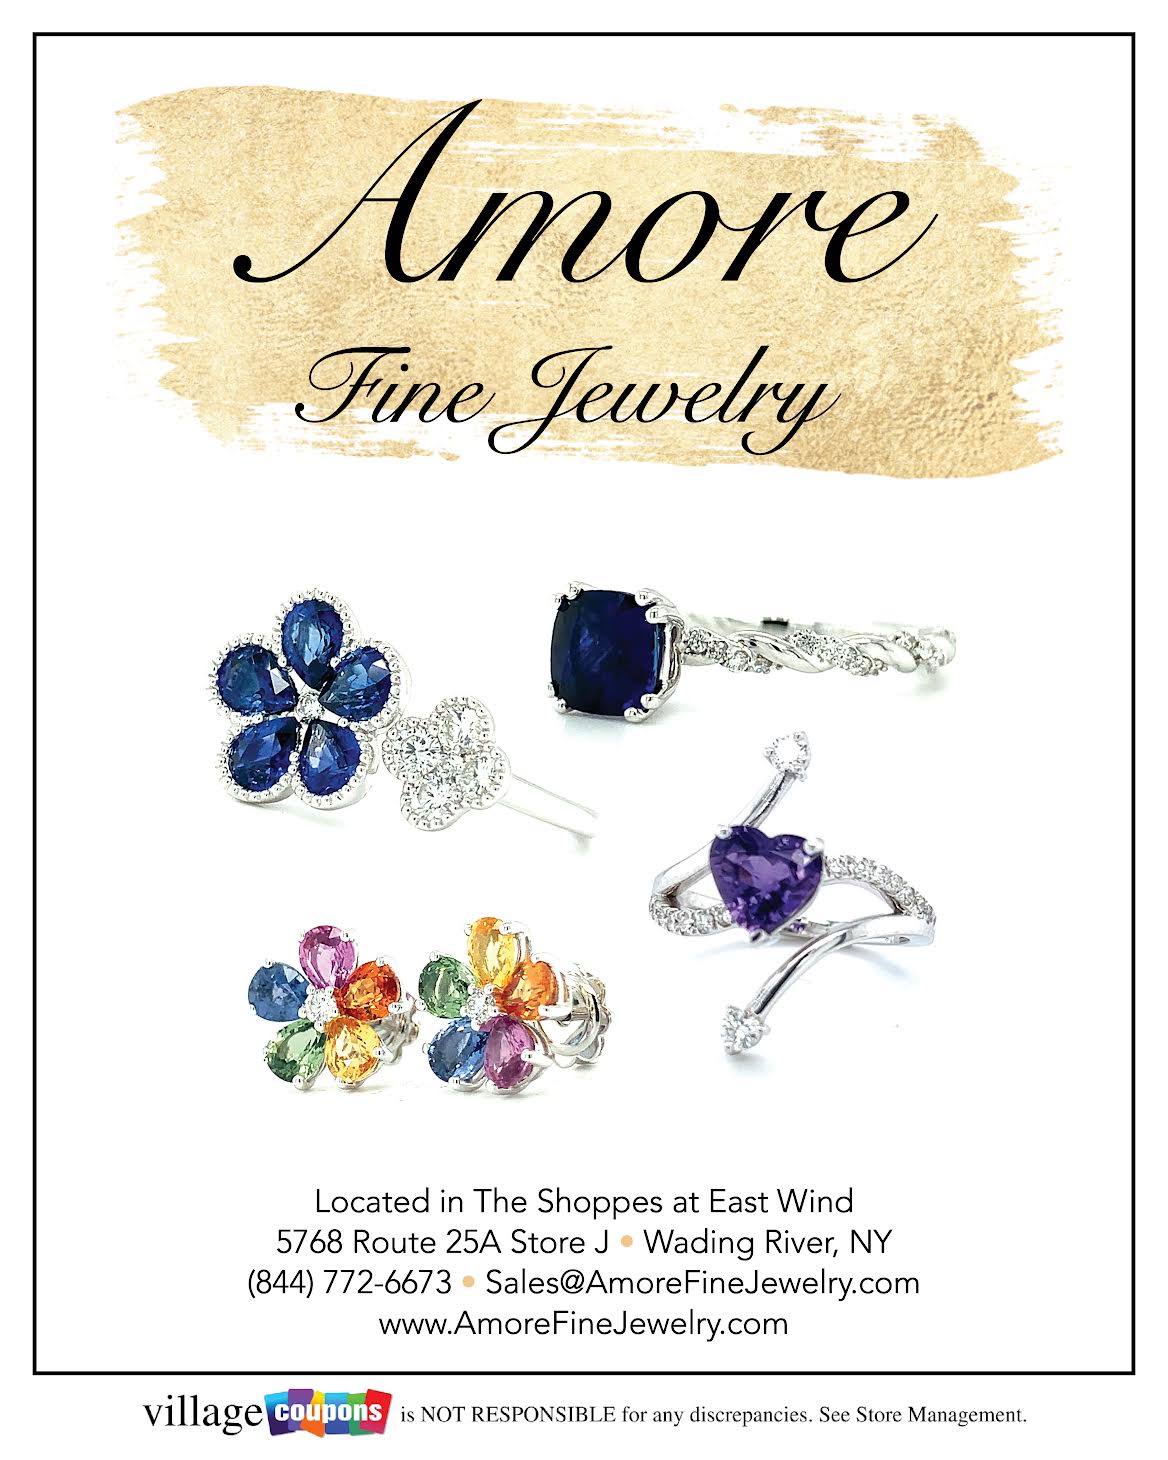 An advertisement for amore fine jewelry shows a variety of rings and earrings